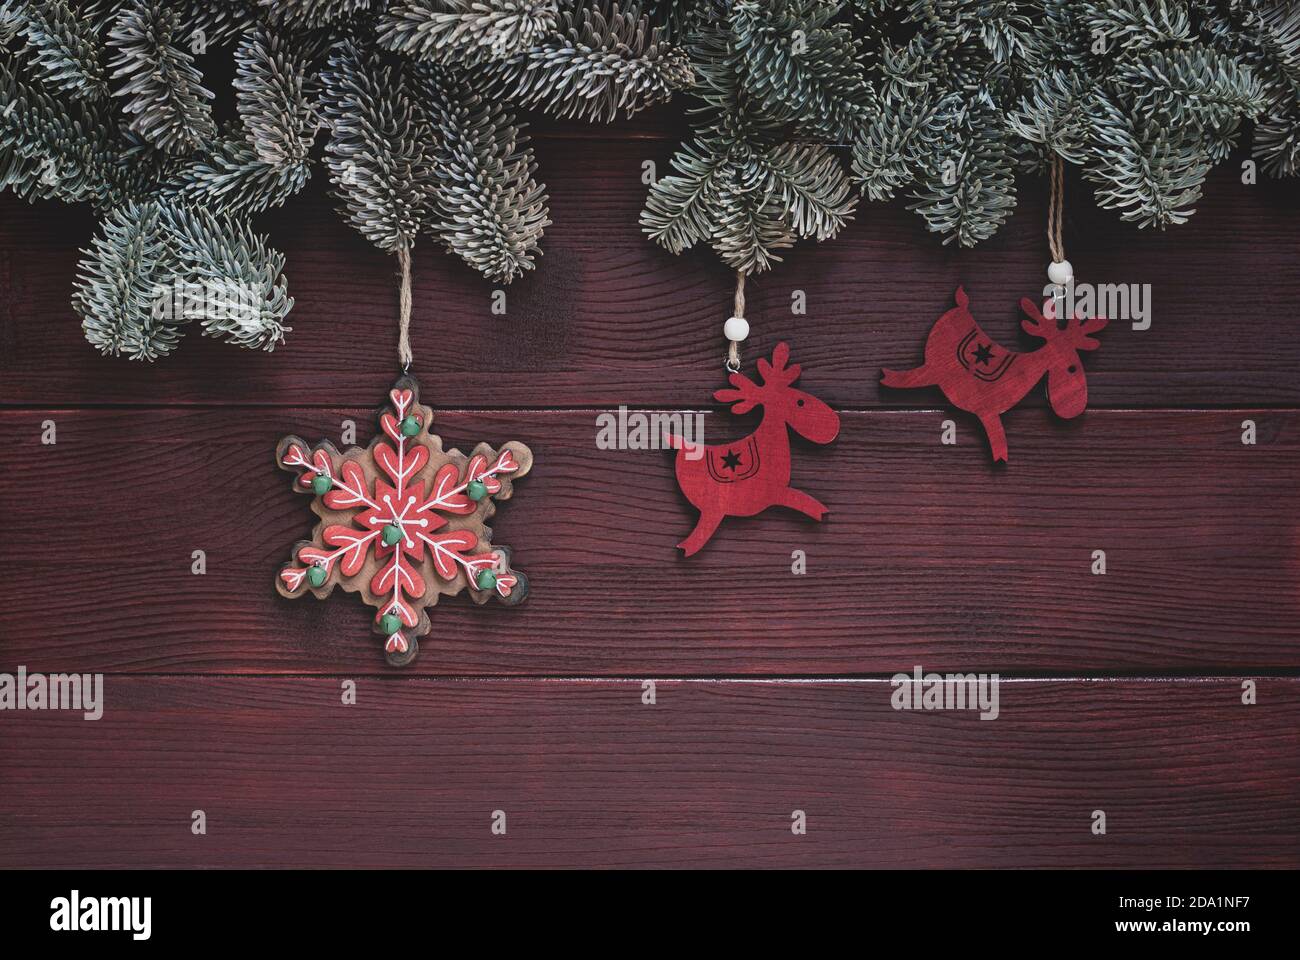 winter holidays traditional ornaments, christmas background with spruce twigs border, deers and snowflake decorations Stock Photo